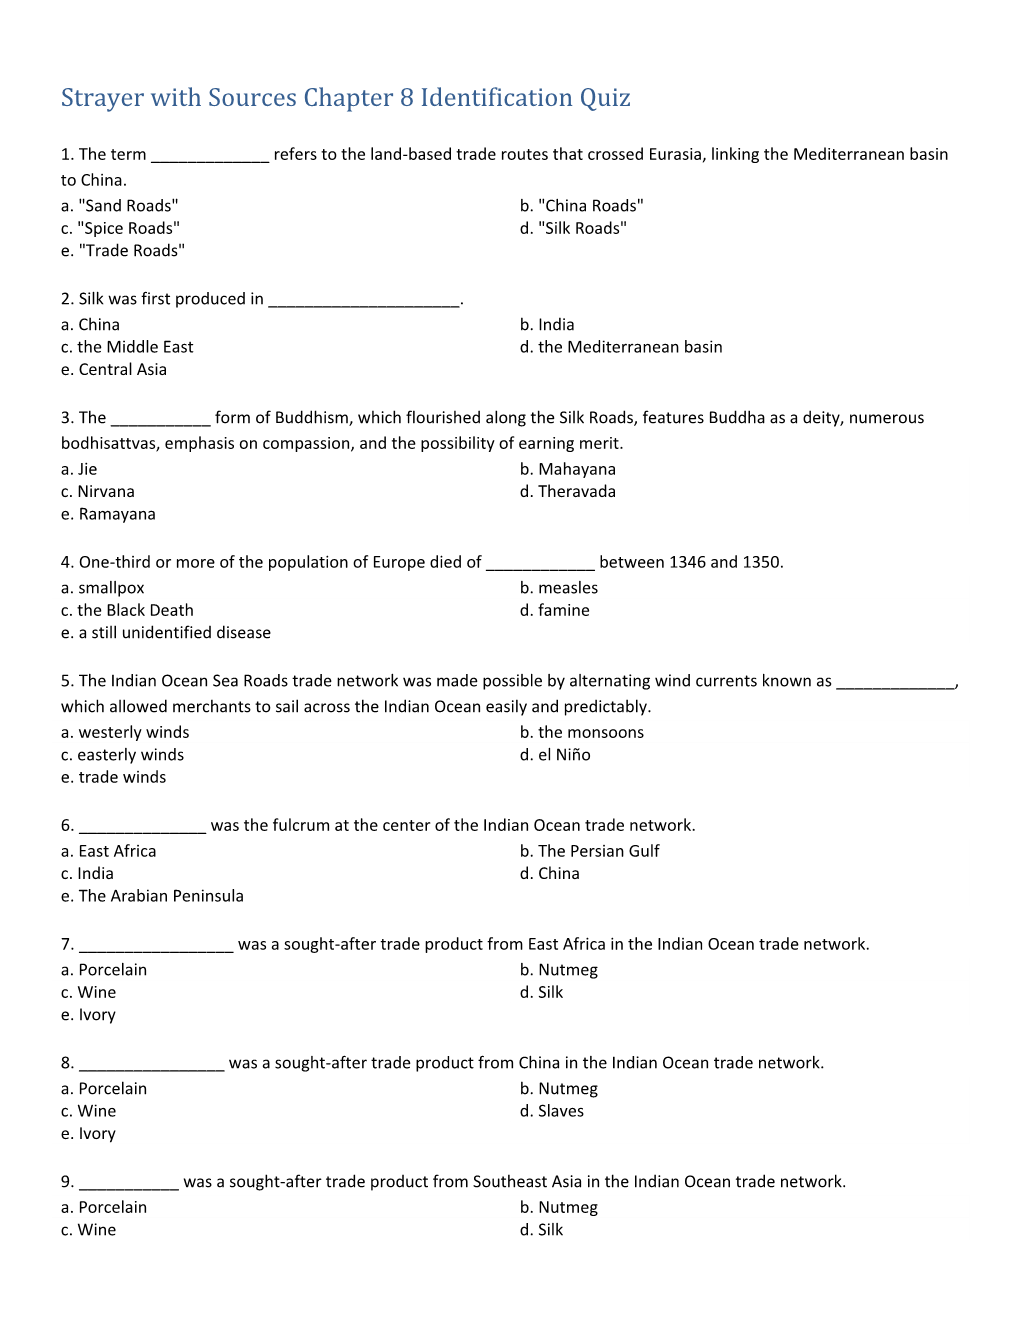 Strayer with Sources Chapter 8 Identification Quiz